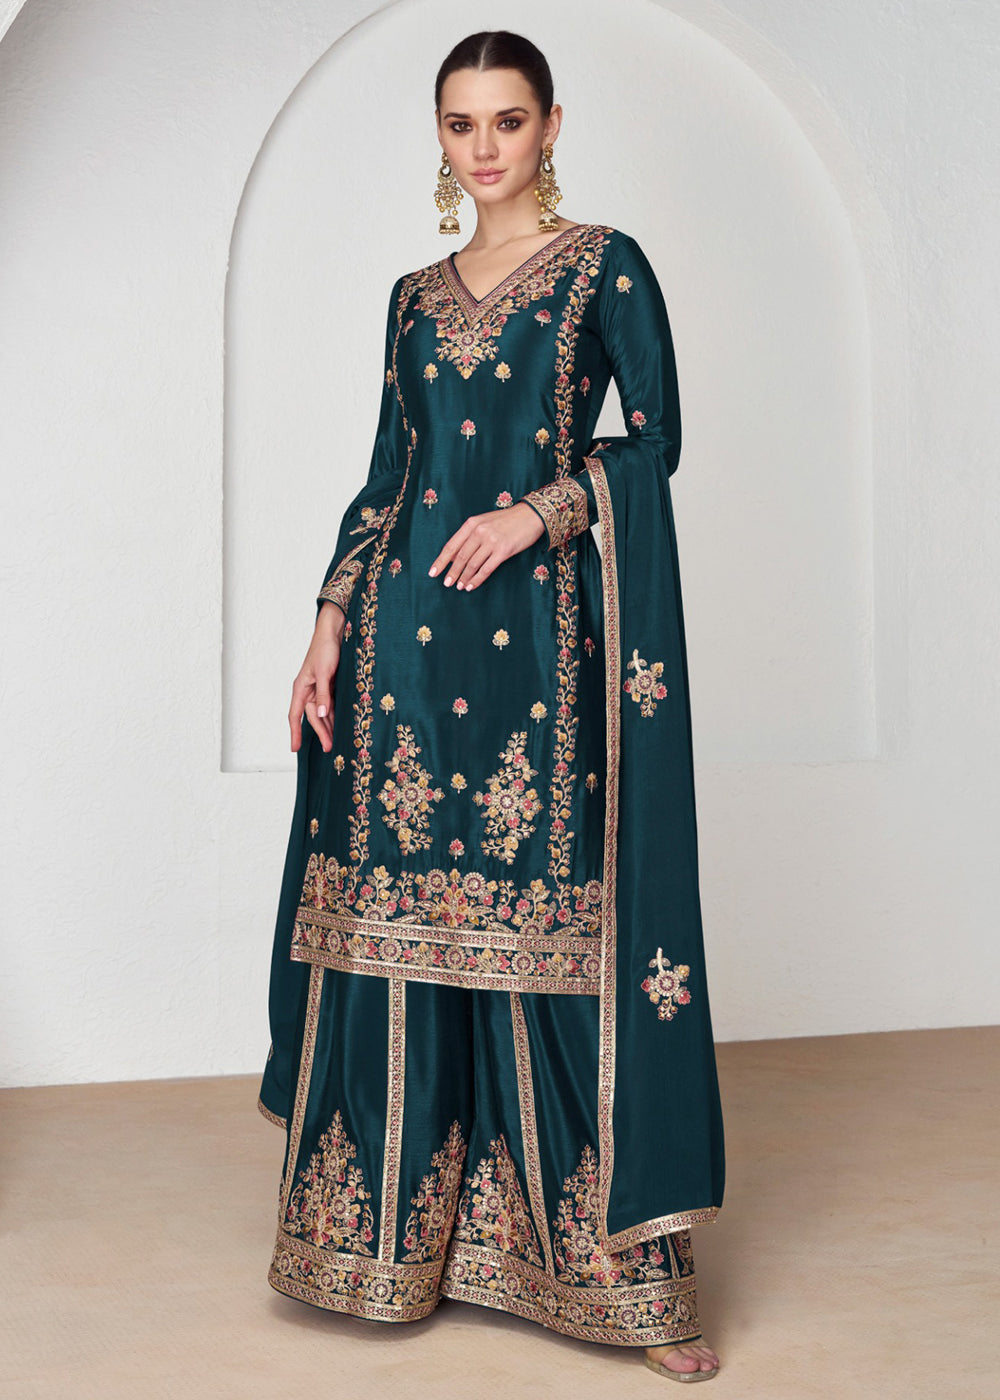 Buy Now Palazzo Style Premium Chinnon Silk Teal Blue Festive Suit Online in USA, UK, Canada, Germany, Australia & Worldwide at Empress Clothing.